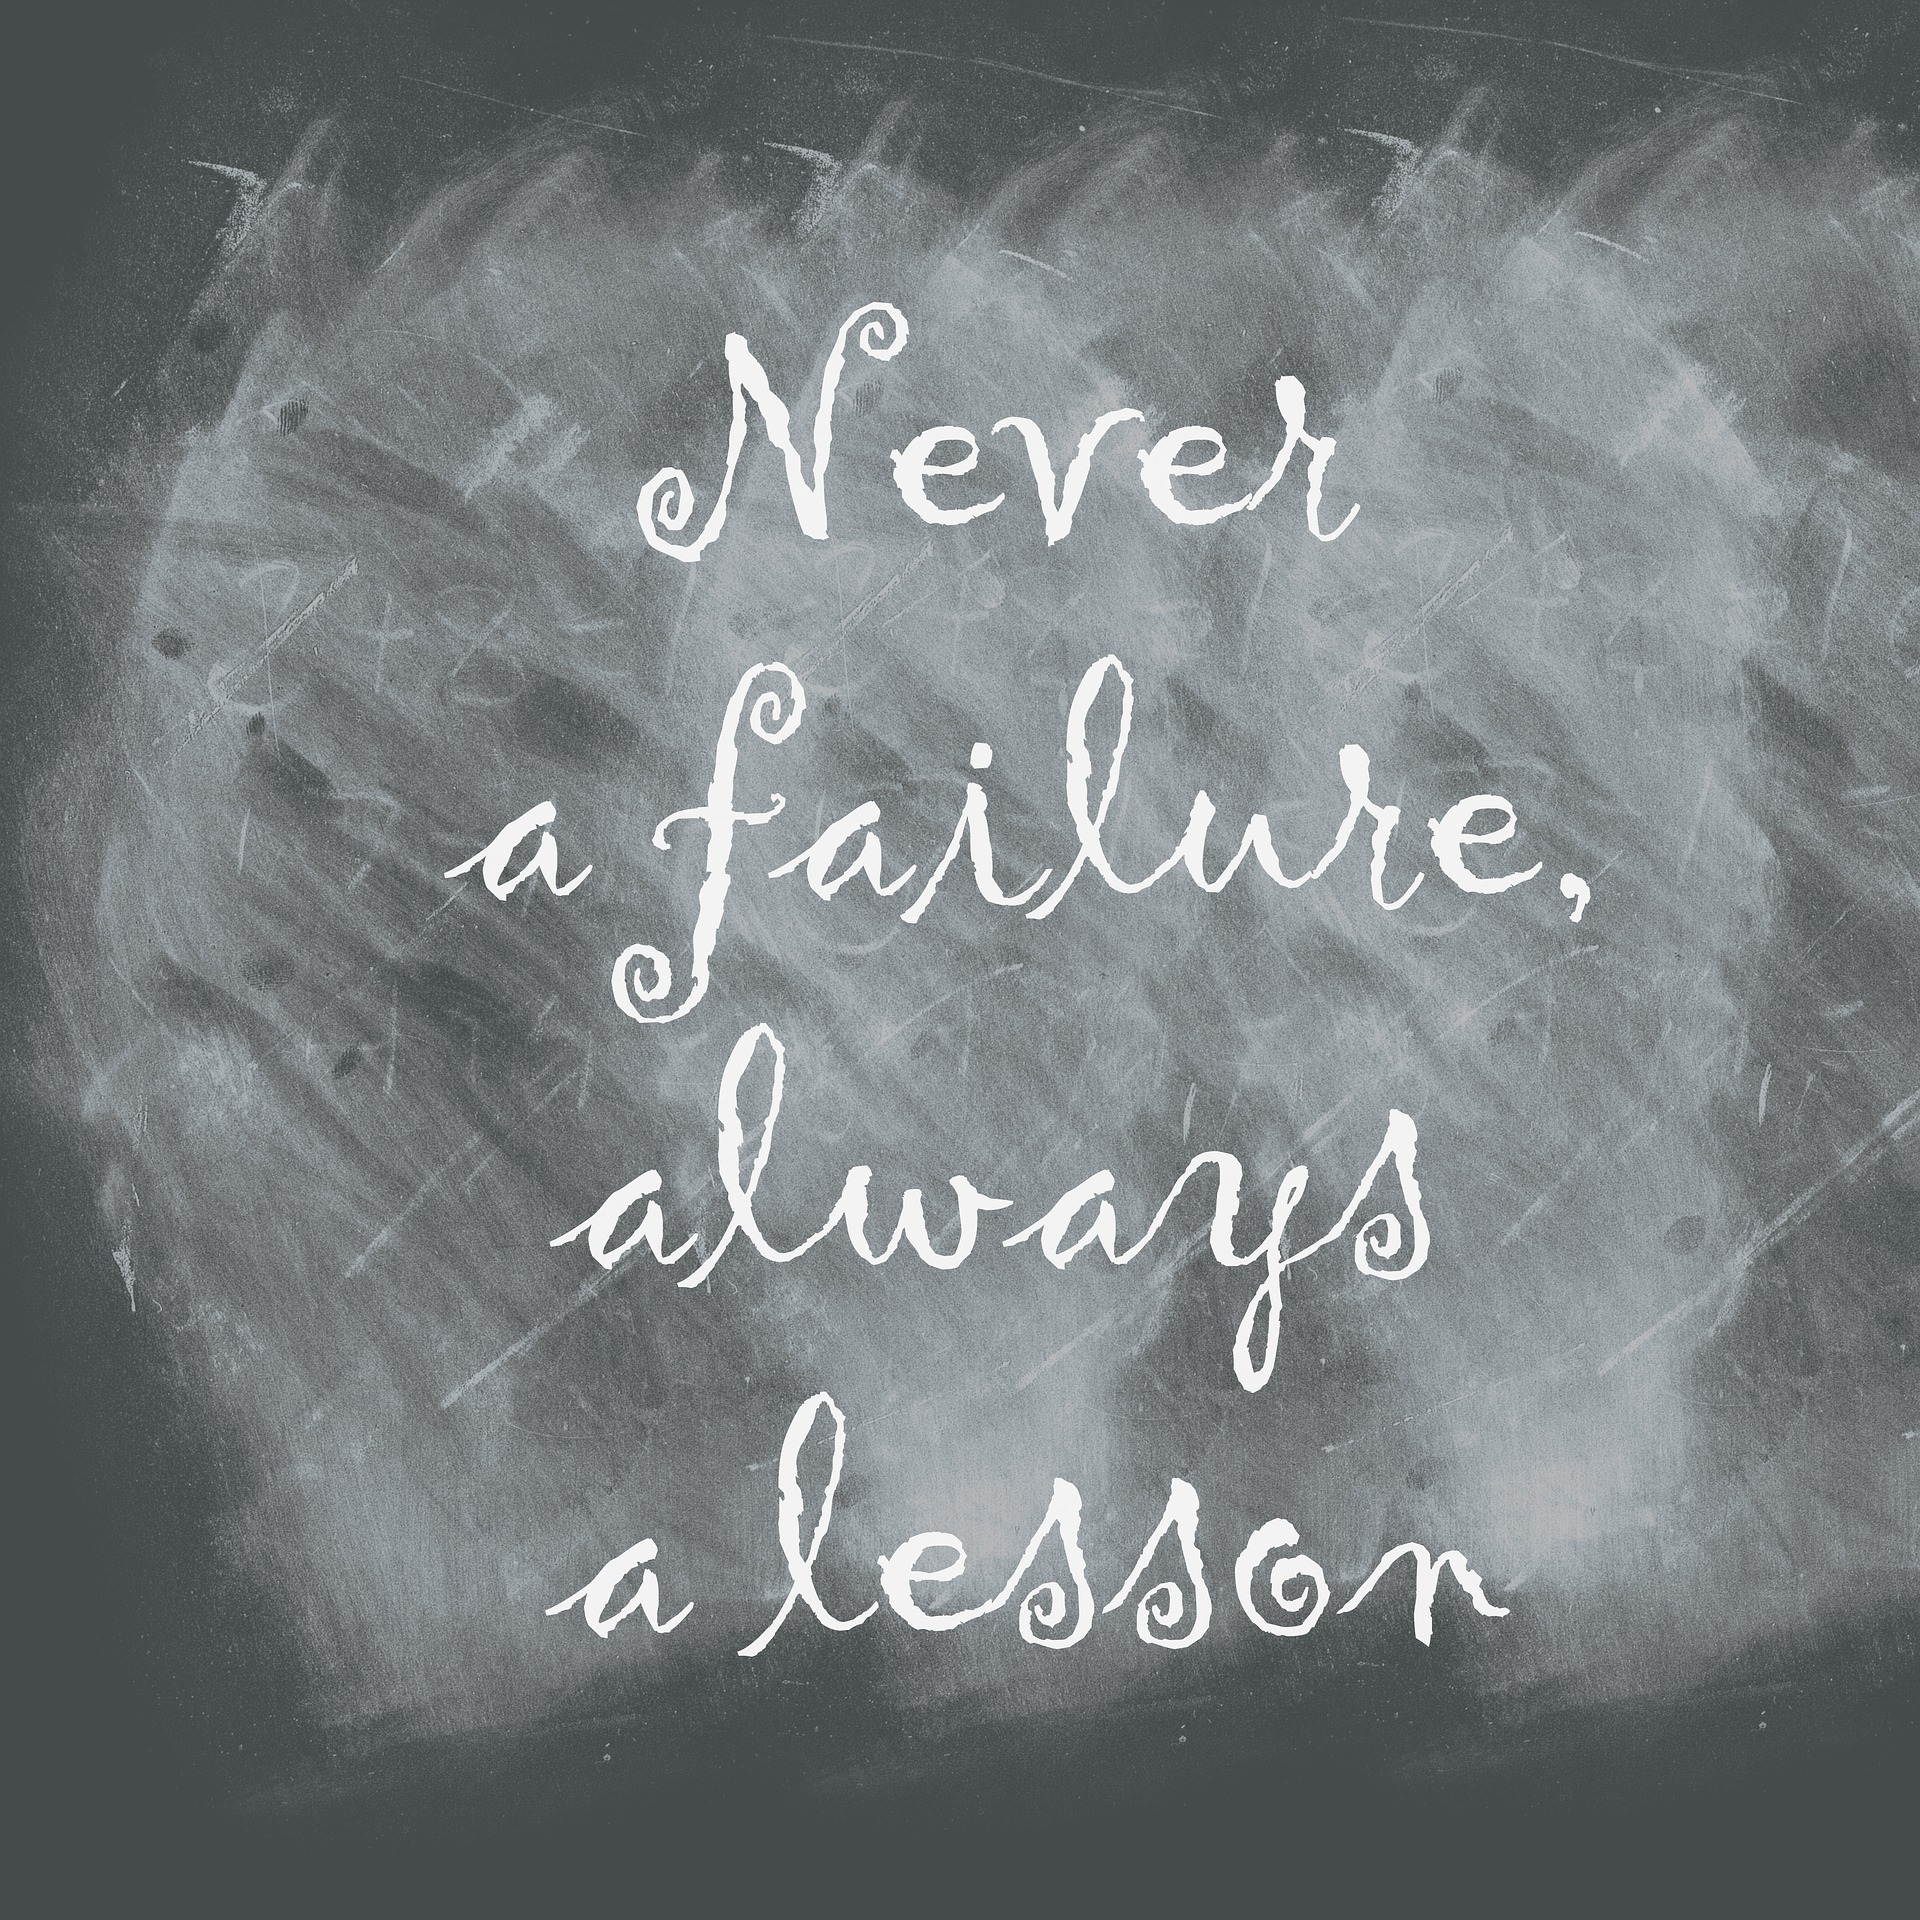 not failure, always lesson